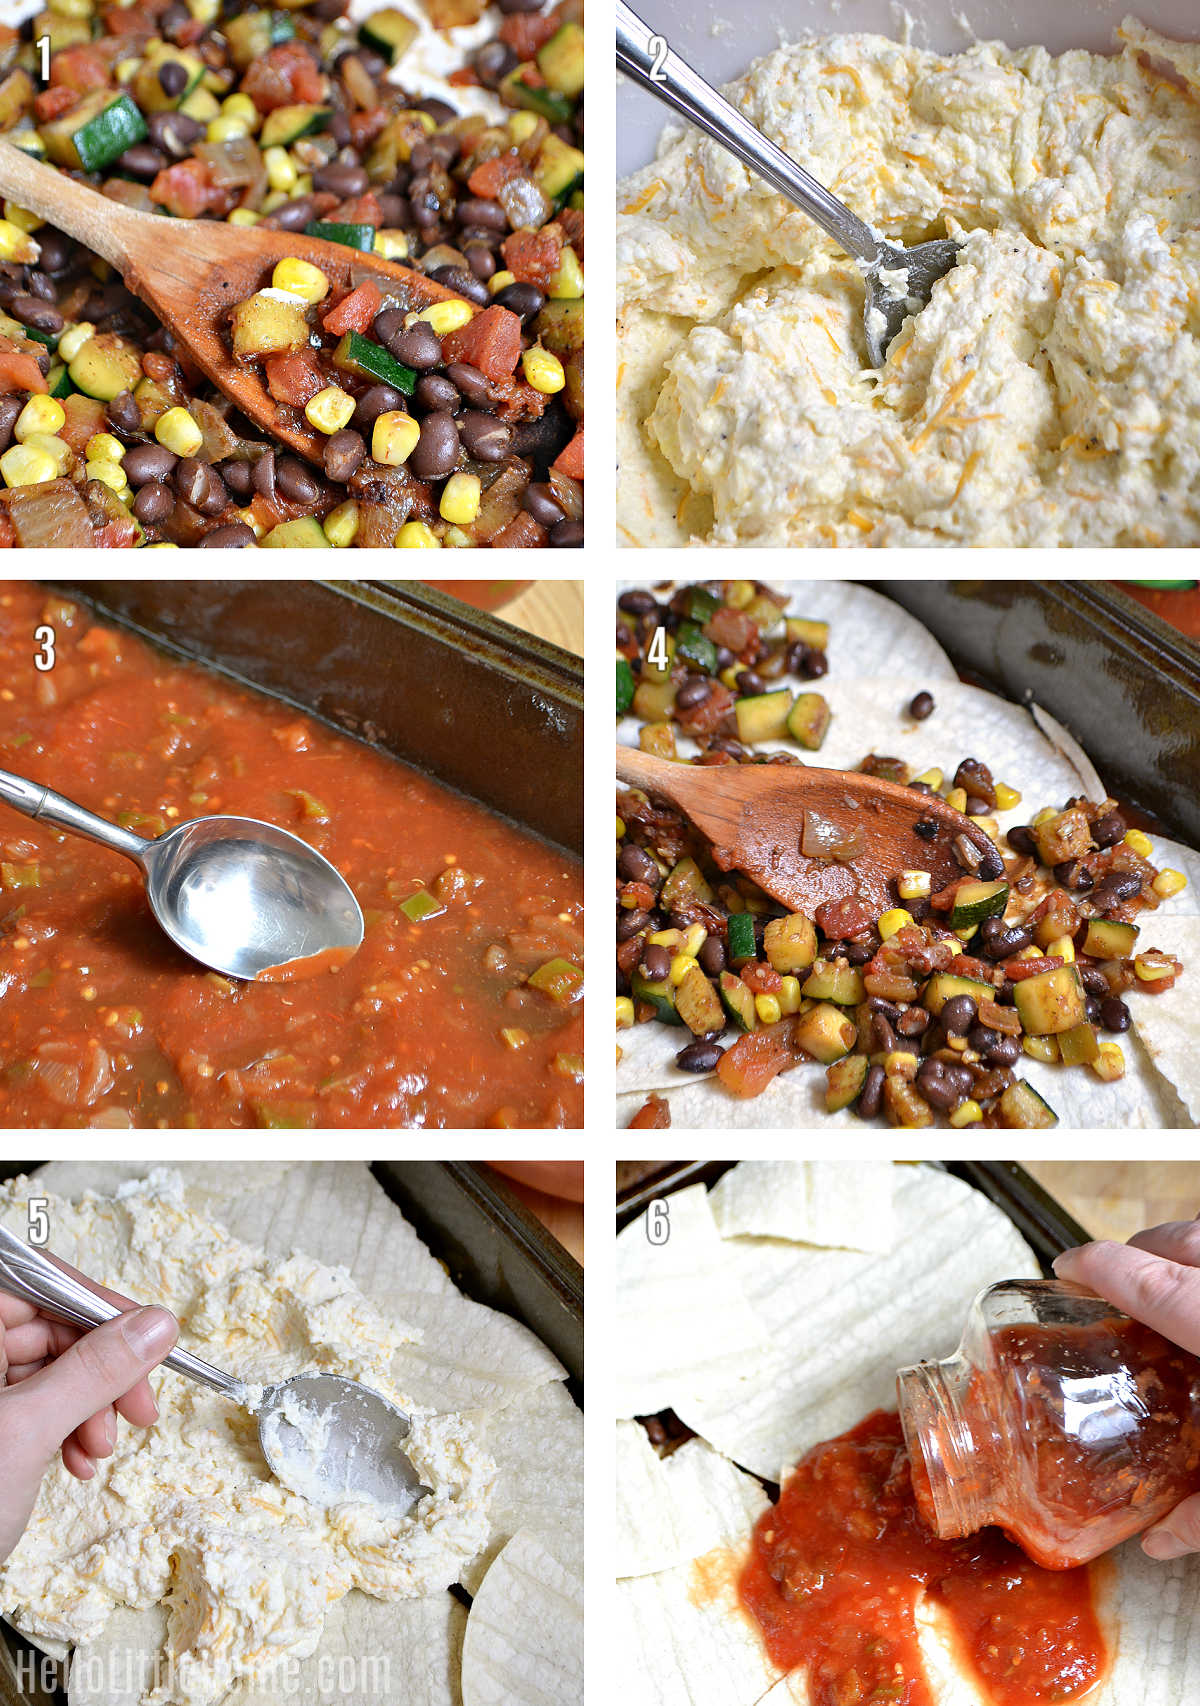 A photo collage showing how to make Mexican Lasagna step-by-step.